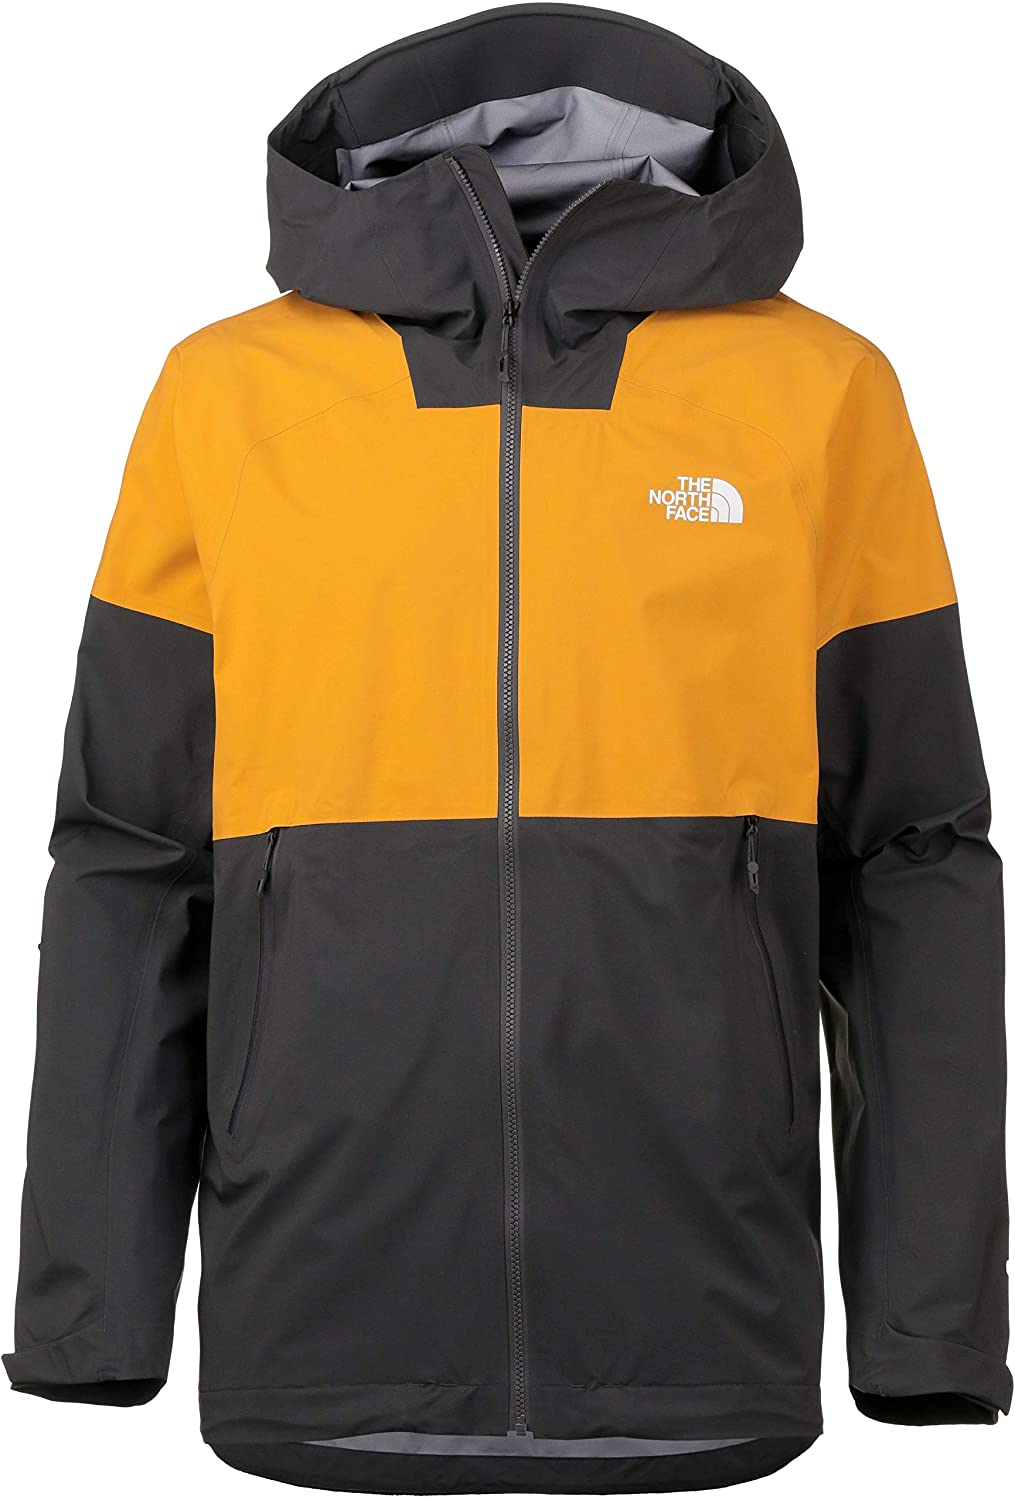 The North Face Giacca Uomo IMPENDOR C-Knit in GORE-TEX